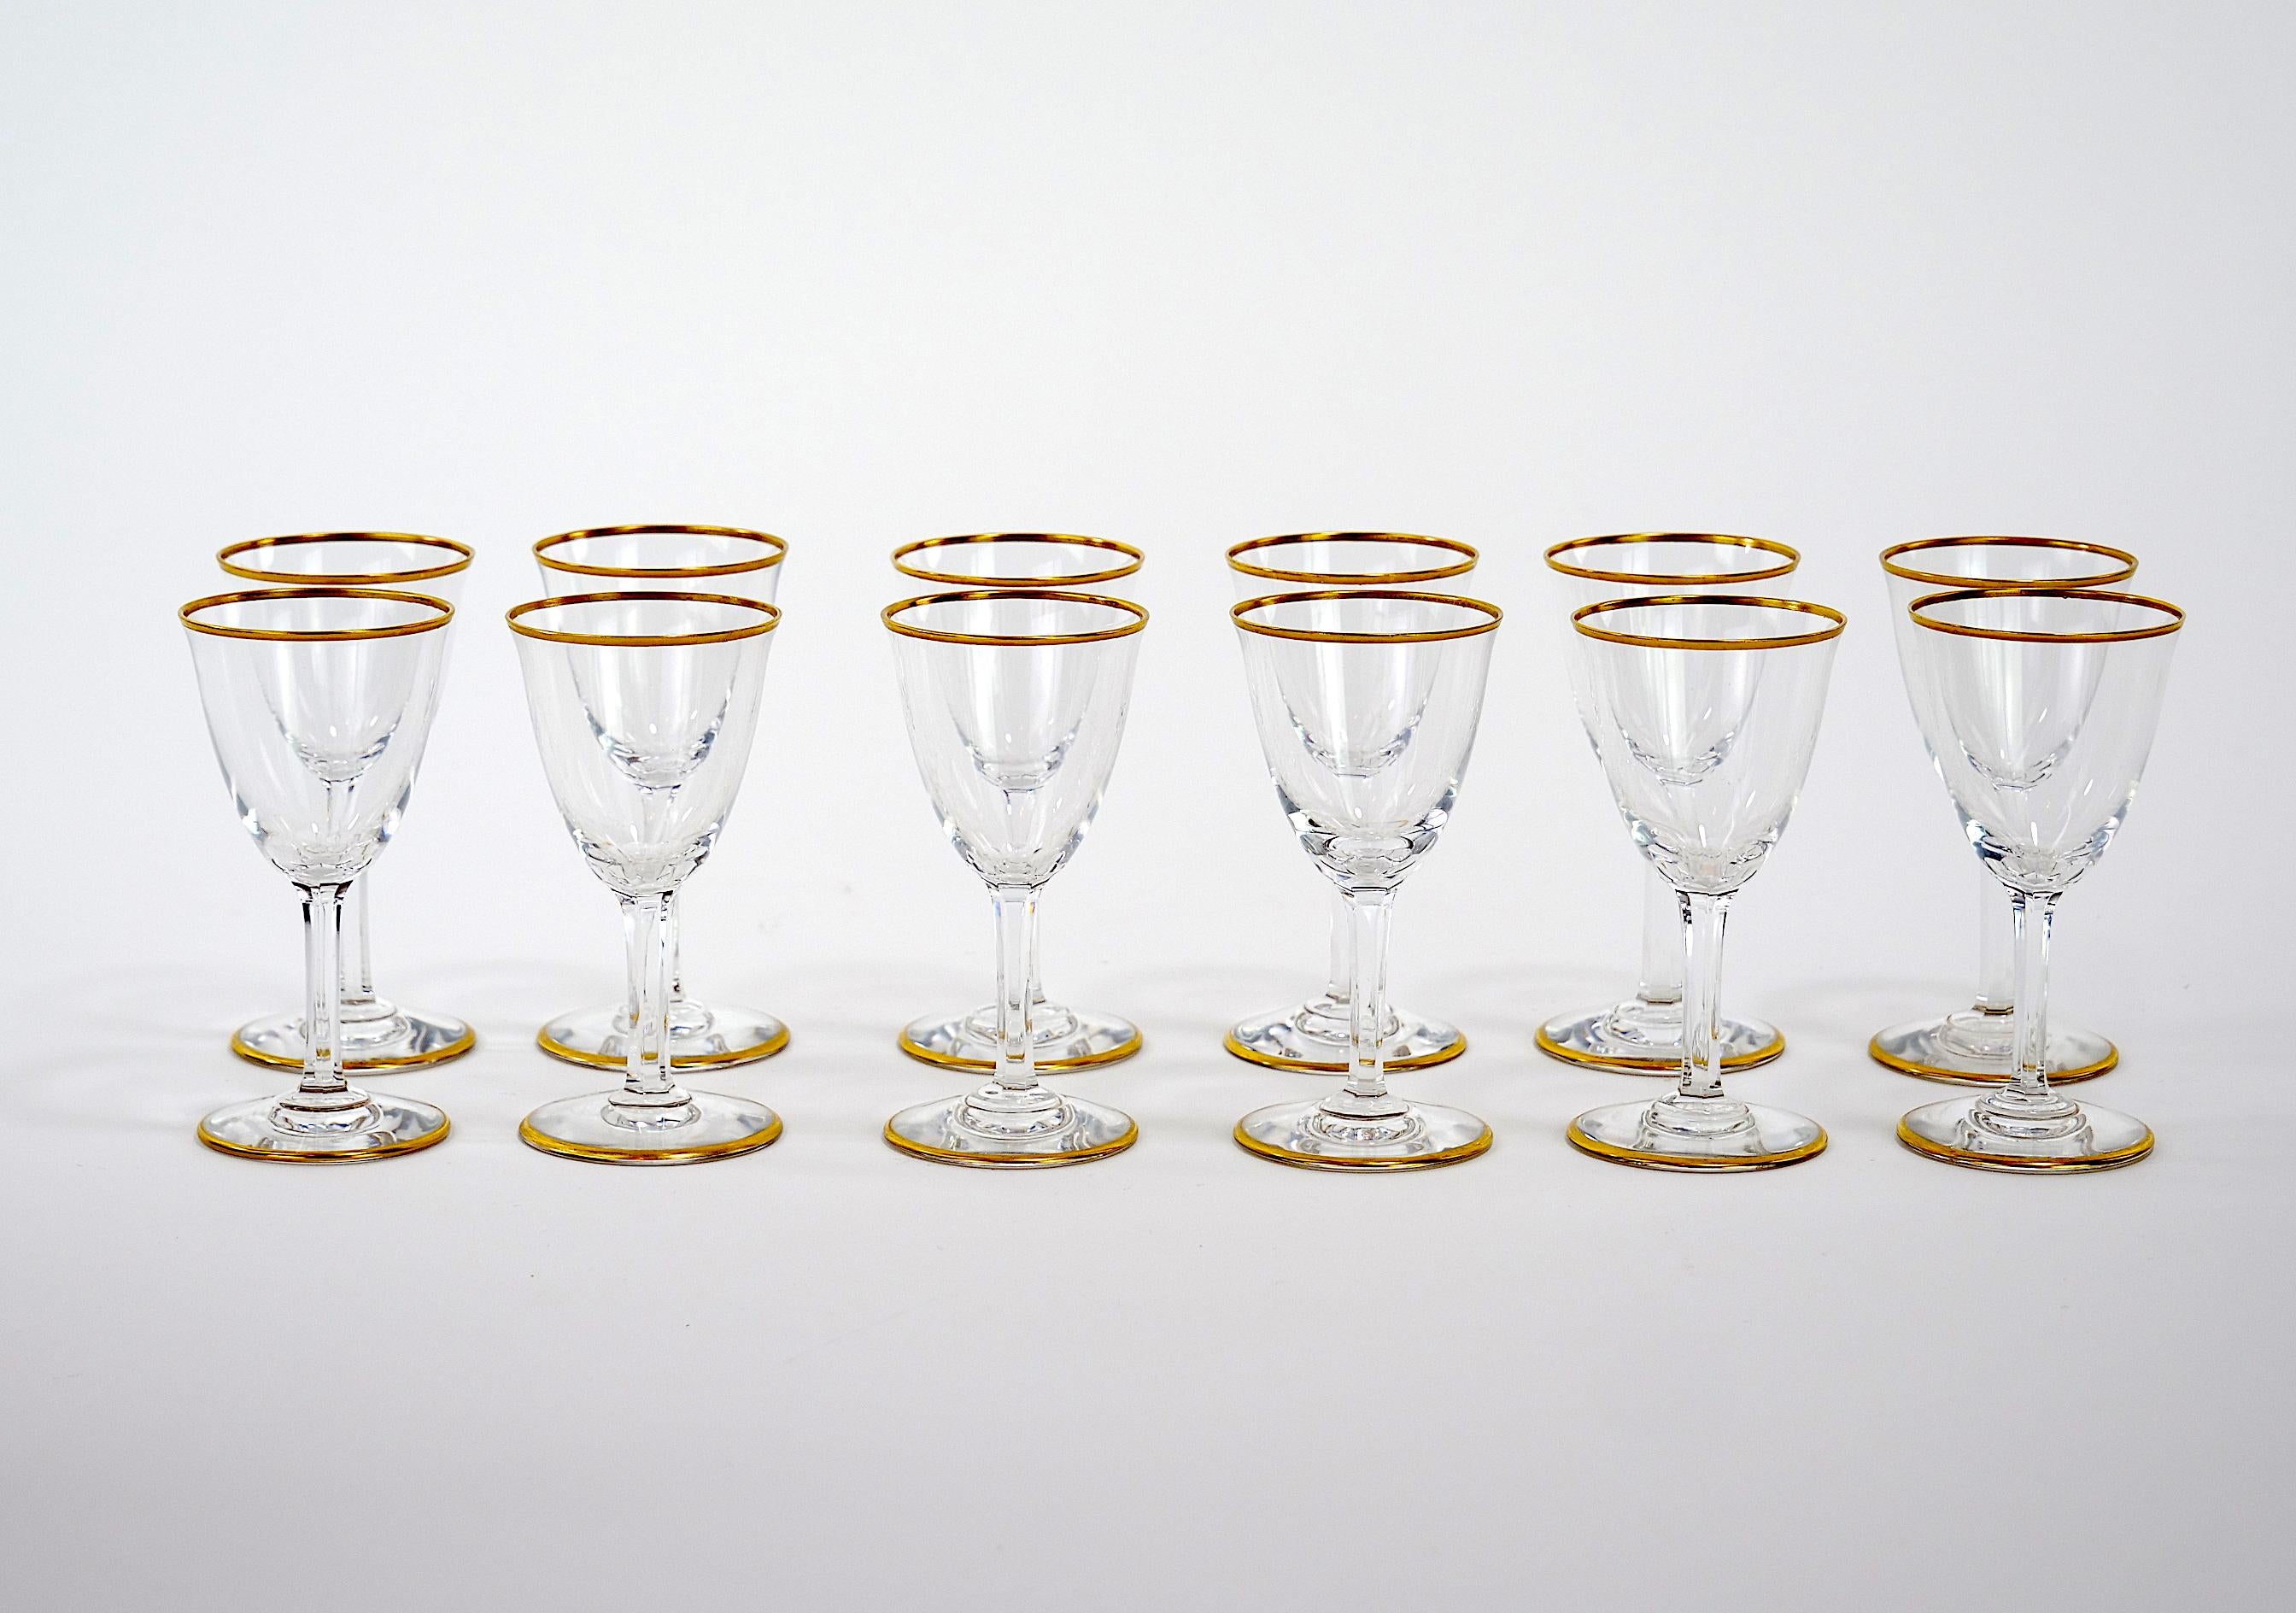 
Beautifully hand carved and gilt gold trimmed top and base baccarat crystal after dinner drinks or sherry tableware service for twelve people. Each glass is in great vintage condition. Maker's mark etched underneath. Minor wear. Each glass